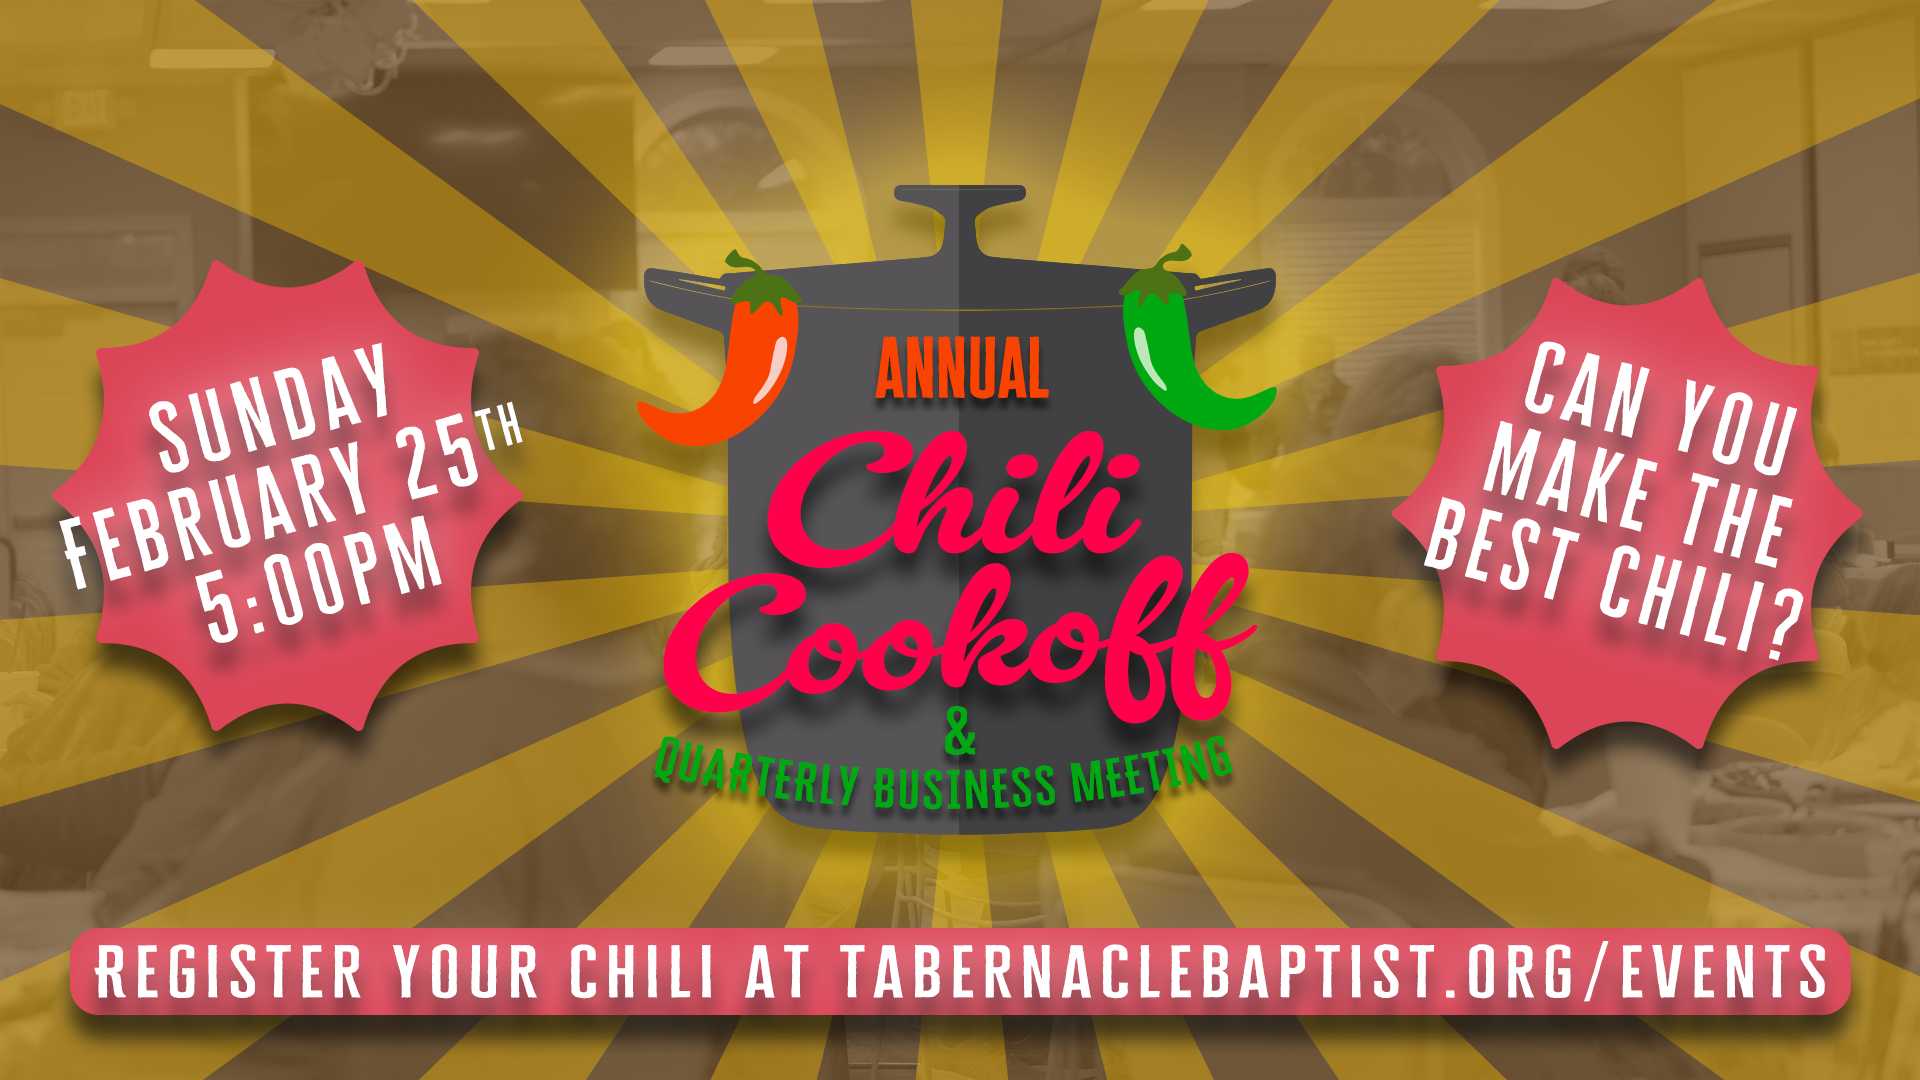 Chili Cook off and Quarterly Business Meeting